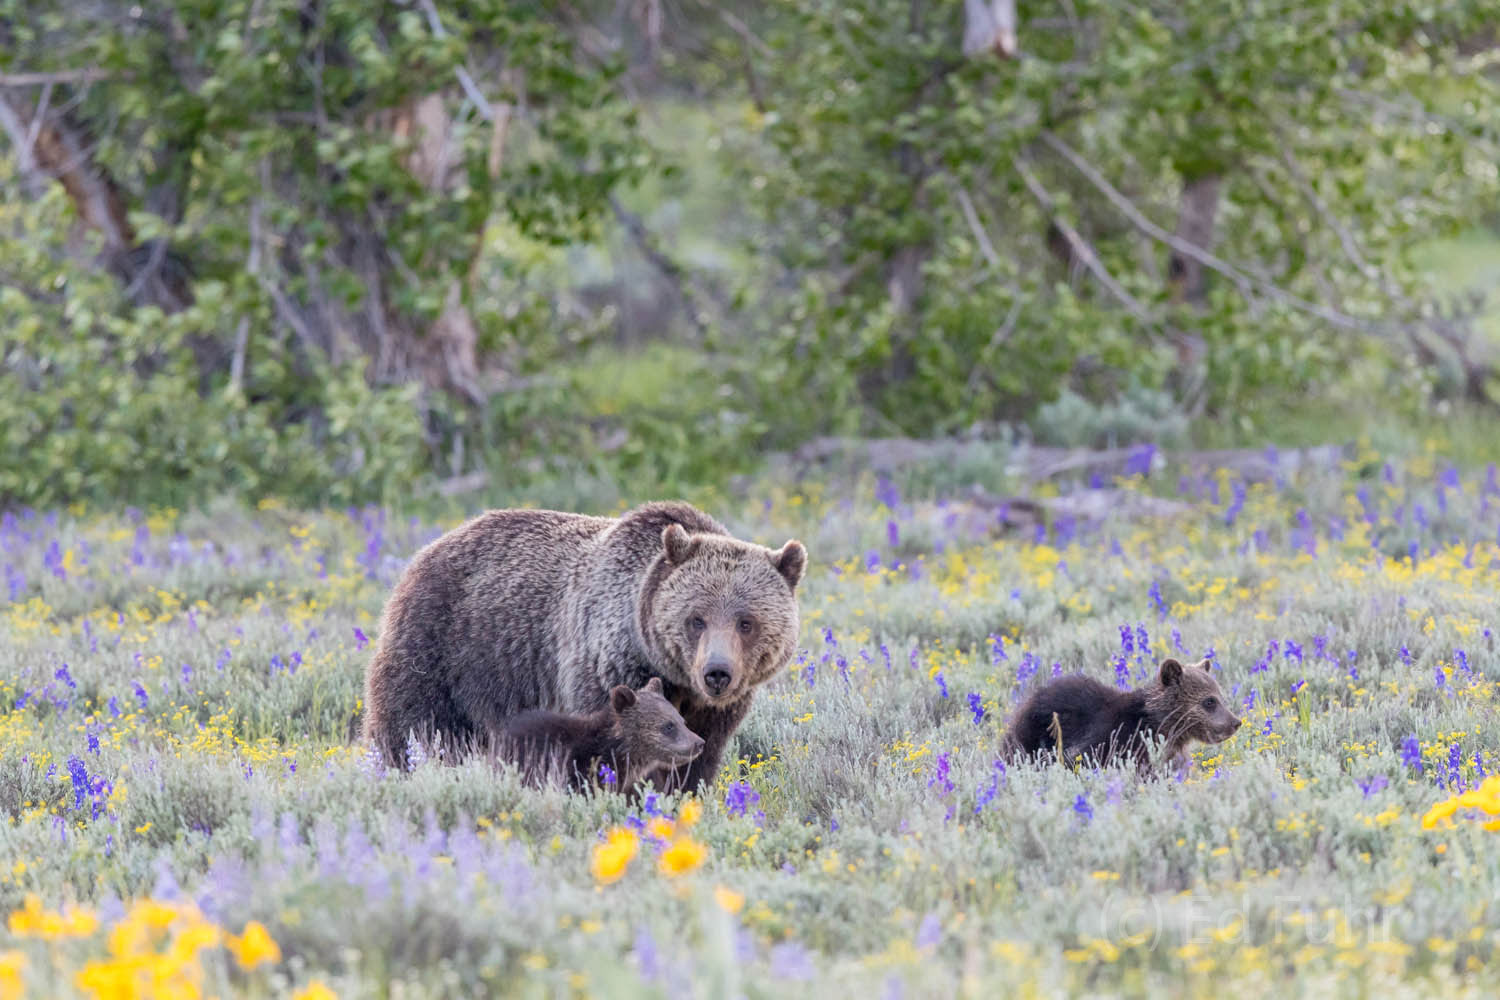 A grizzly bear and her two cubs make their way across a meadow of spring flowers in Grand Teton National Park.